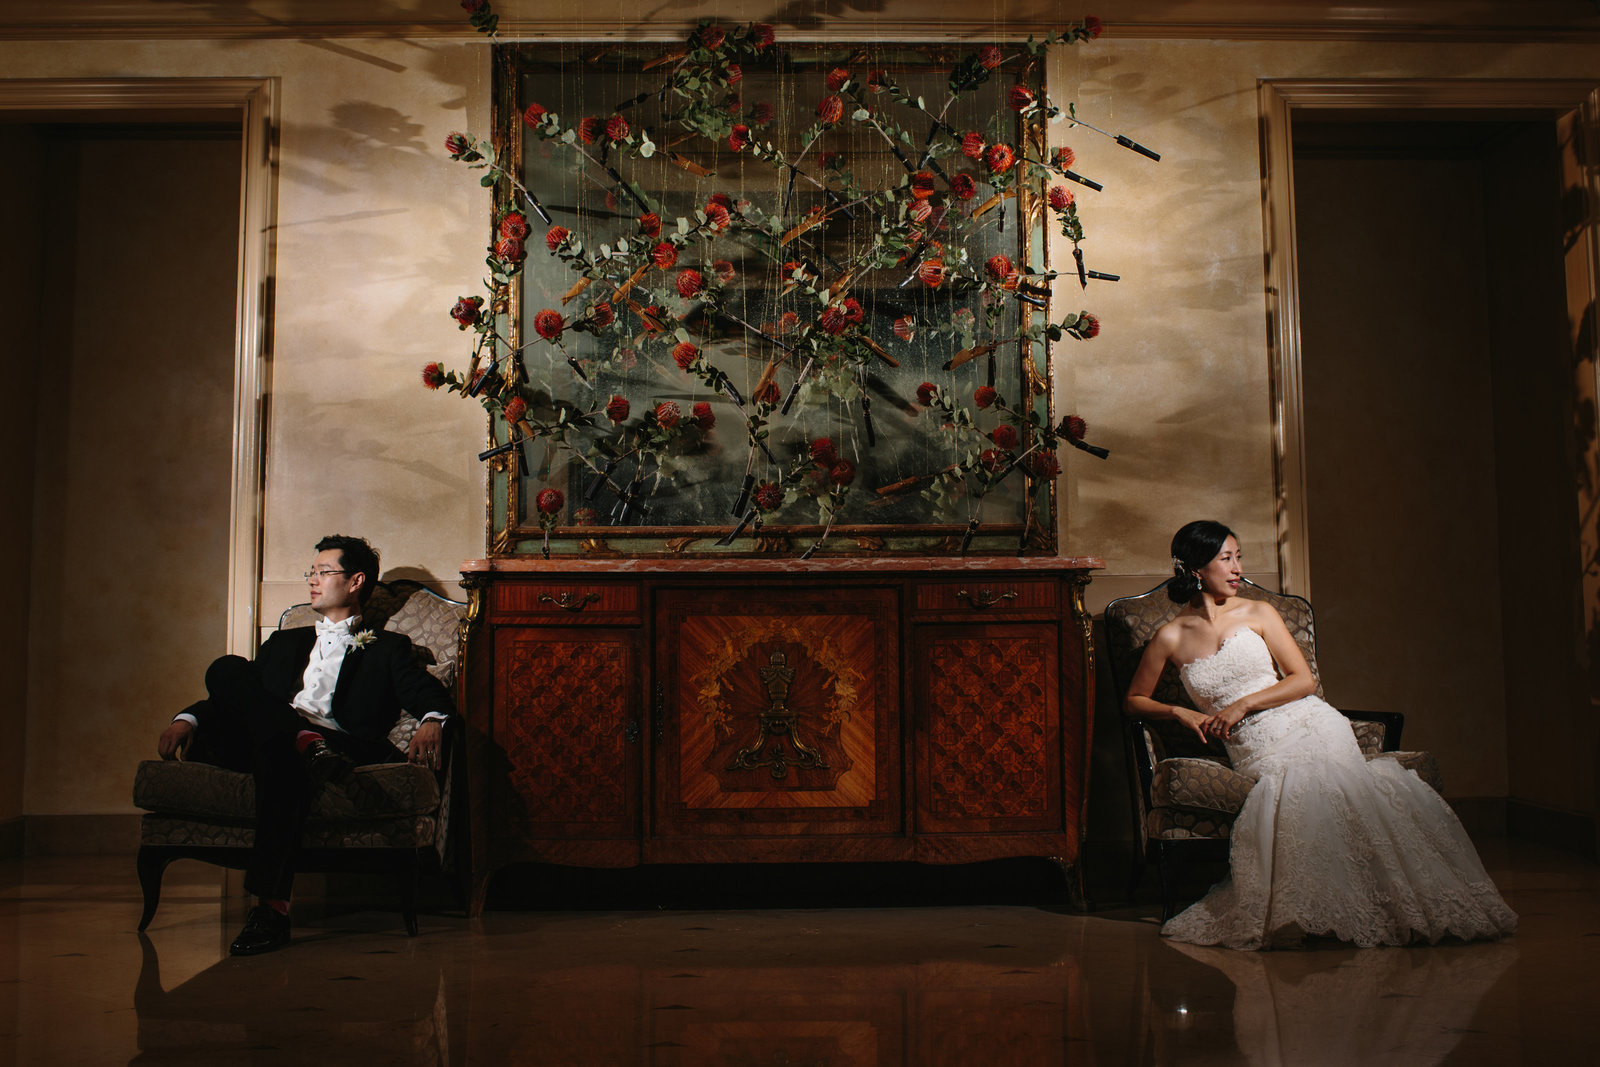 Dramatic bride and groom photo  in hotel lobby sitting on either side of hanging flowers